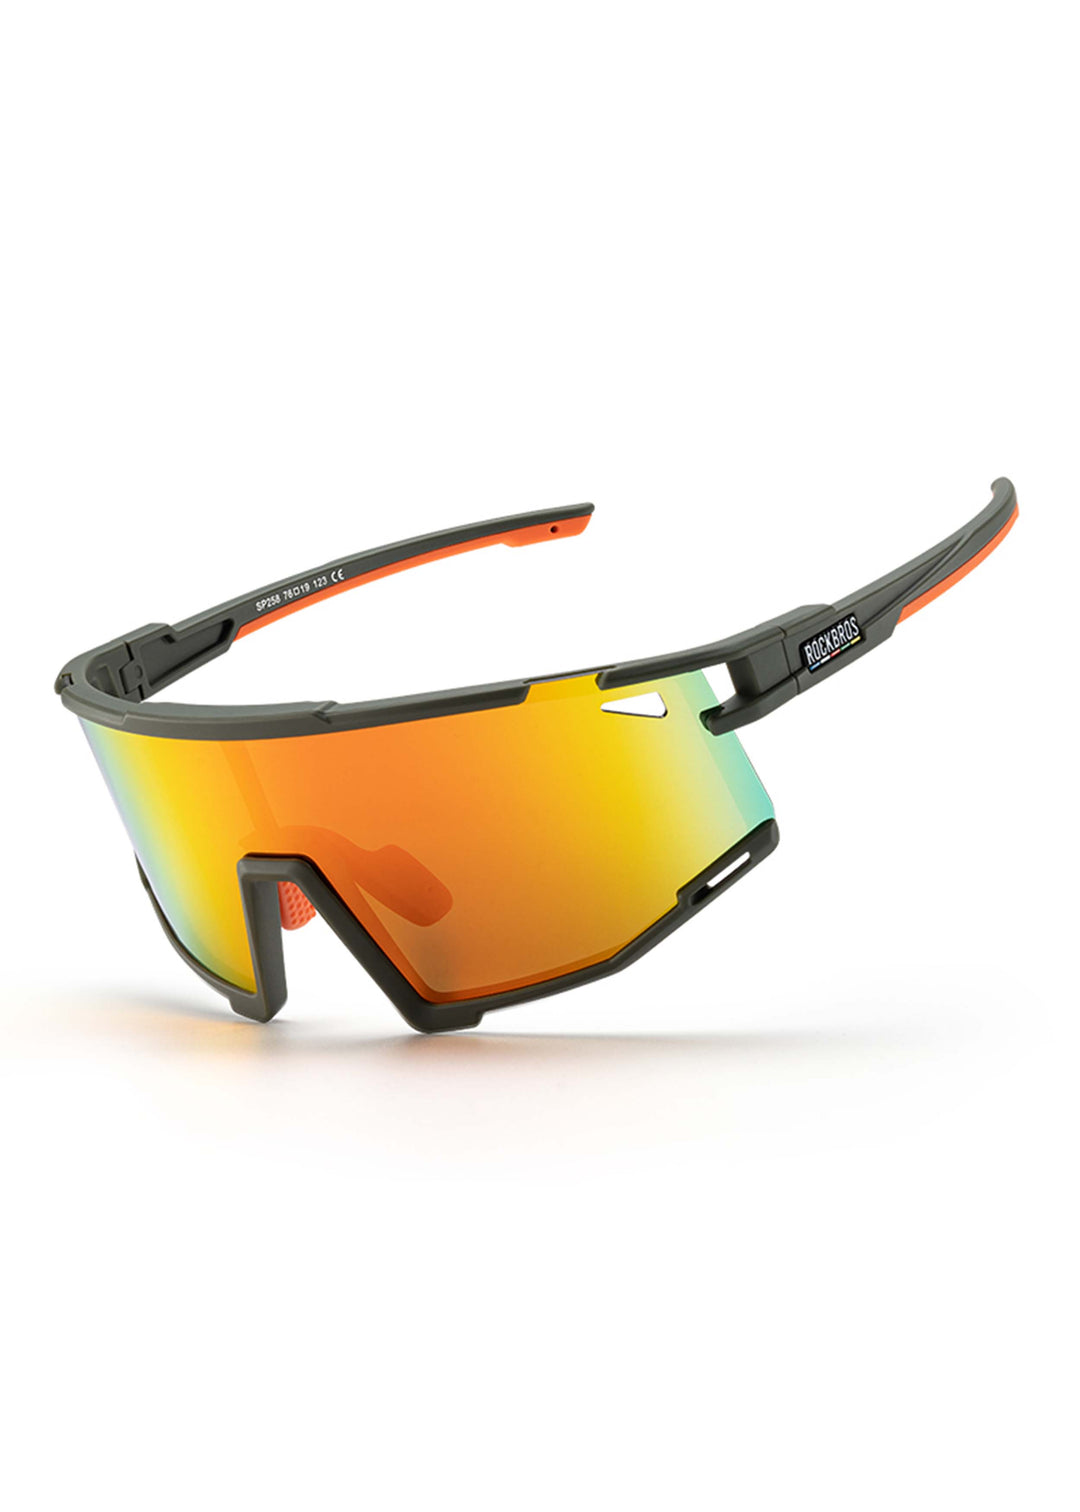 Cycling Glasses - Polarized/Color Changing